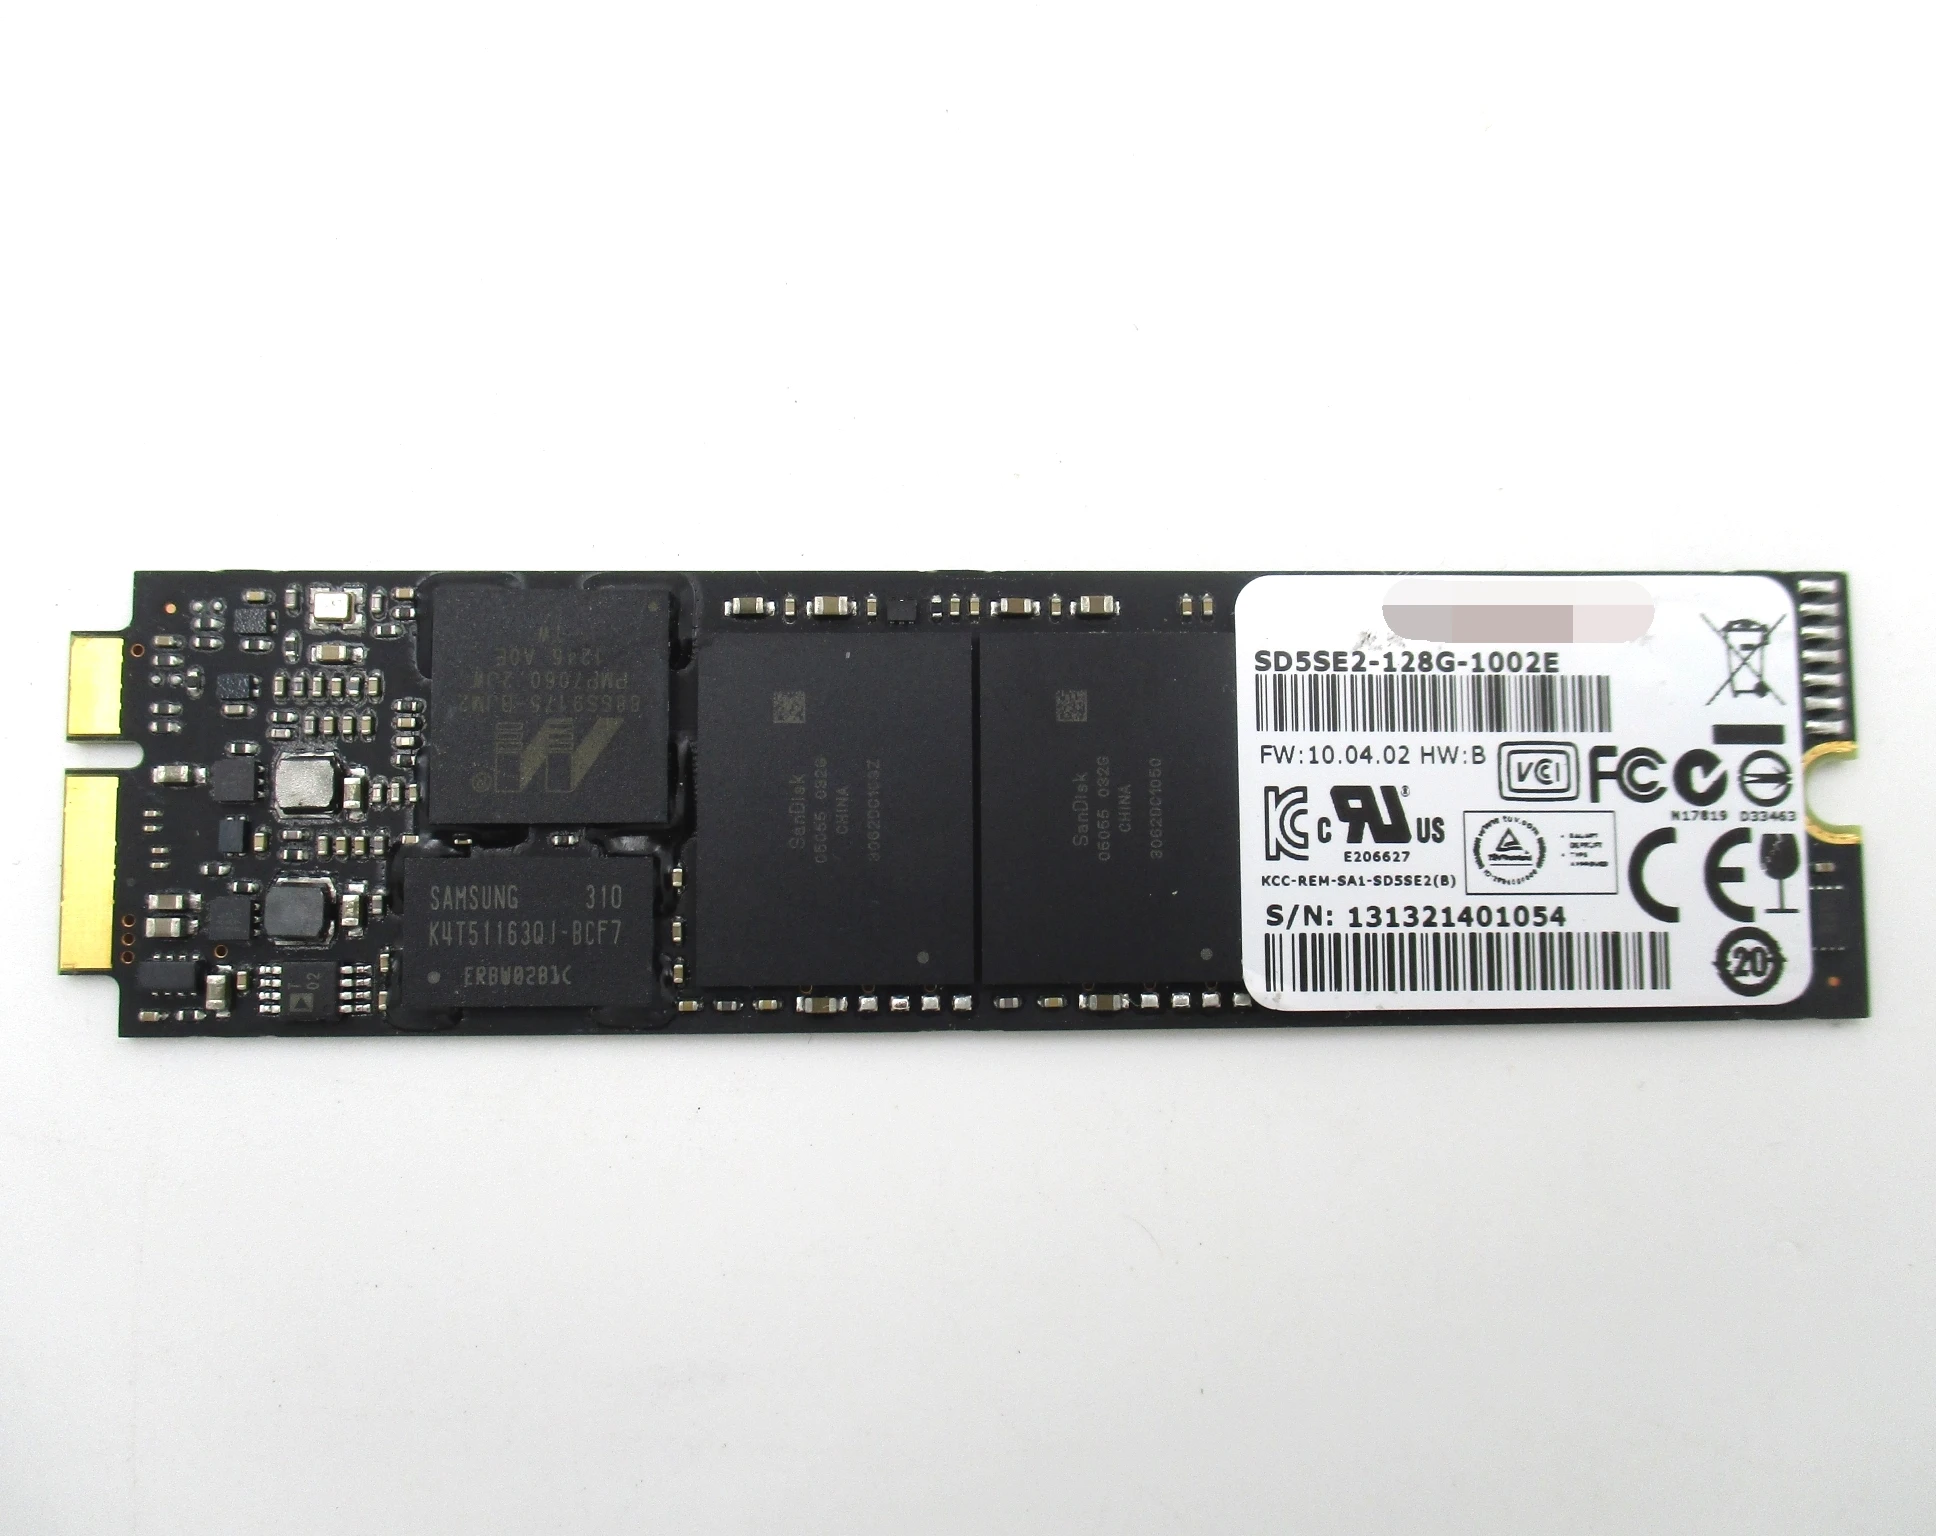 Source SSD for Asus zenbook ux31 SD5SE2-128G-1002E 128G on m.alibaba.com